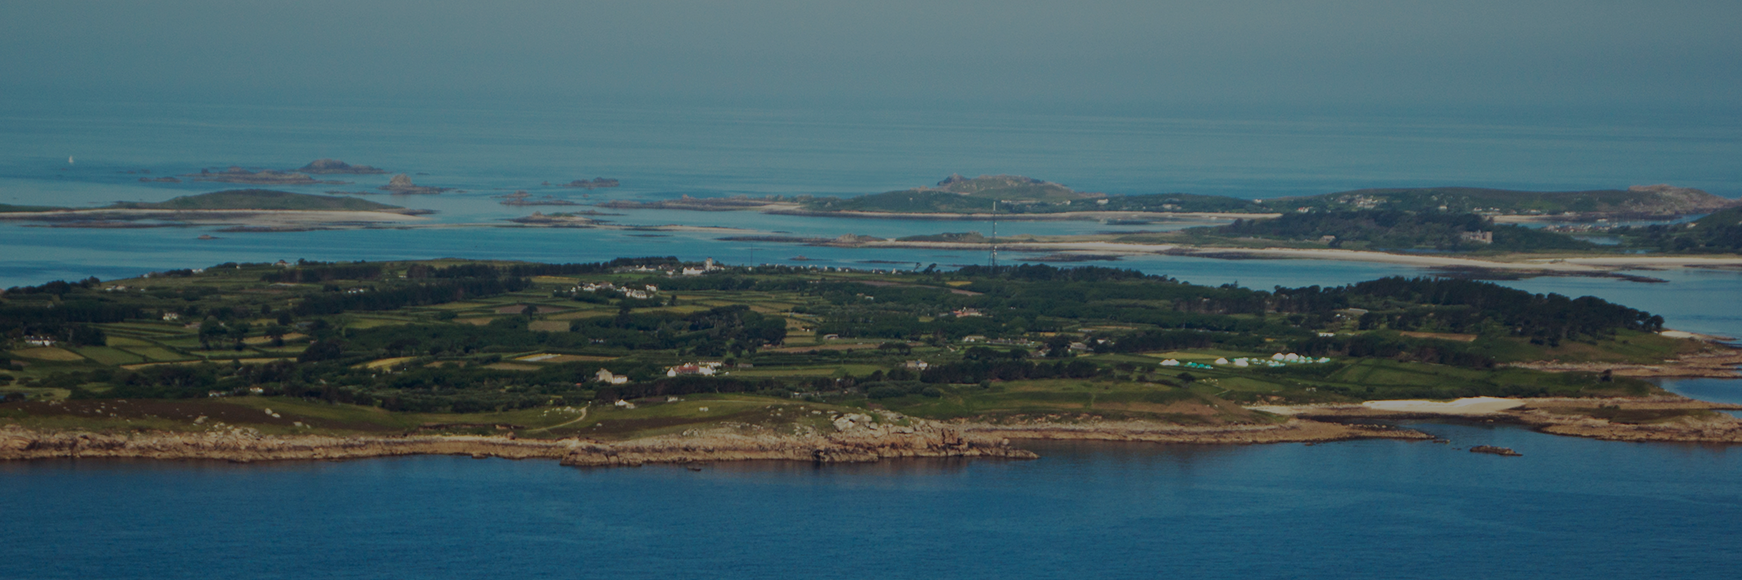 A beginners guide to the Isles of Scilly banner image